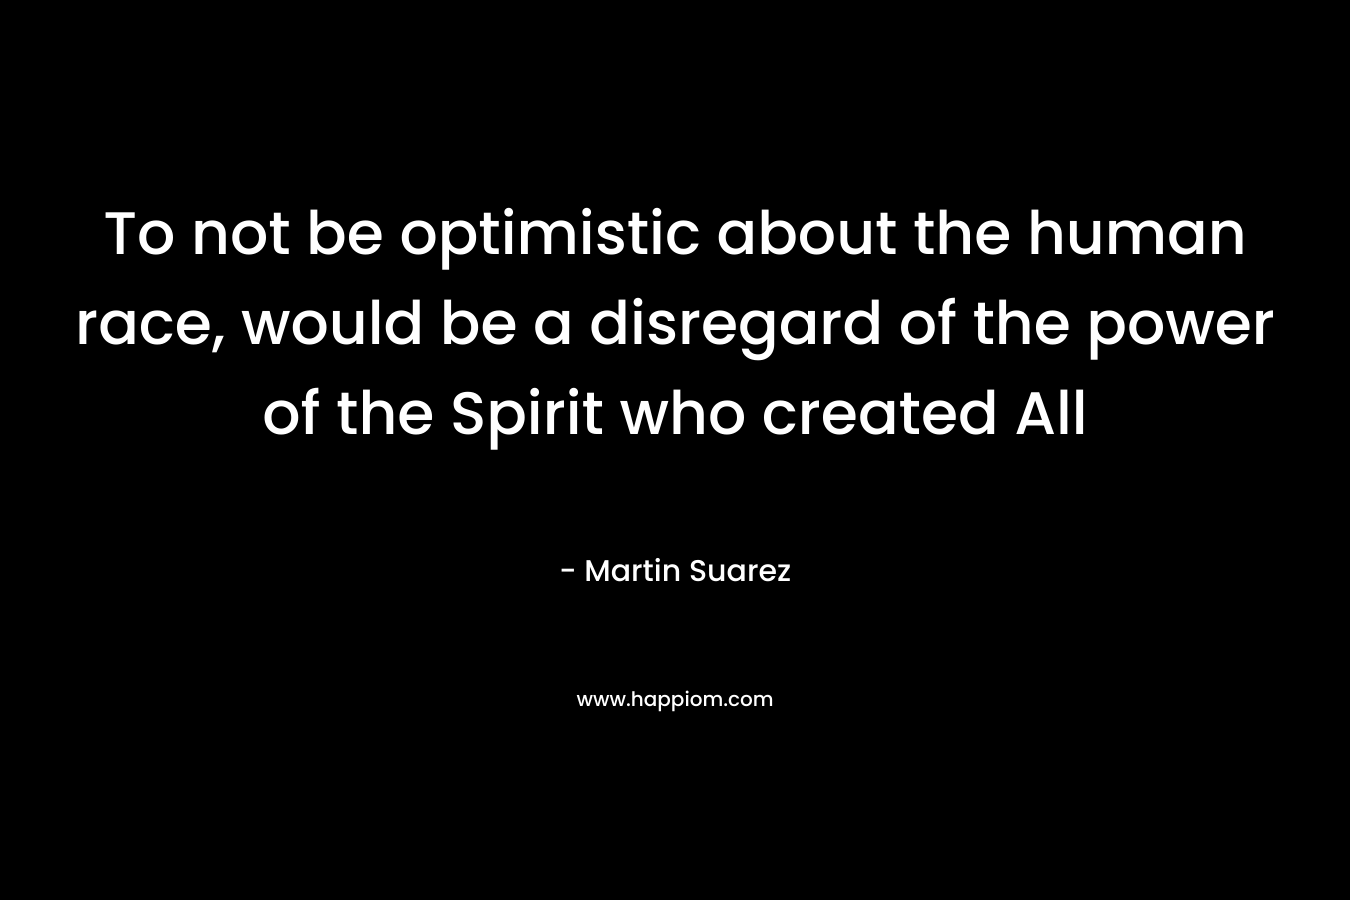 To not be optimistic about the human race, would be a disregard of the power of the Spirit who created All – Martin Suarez